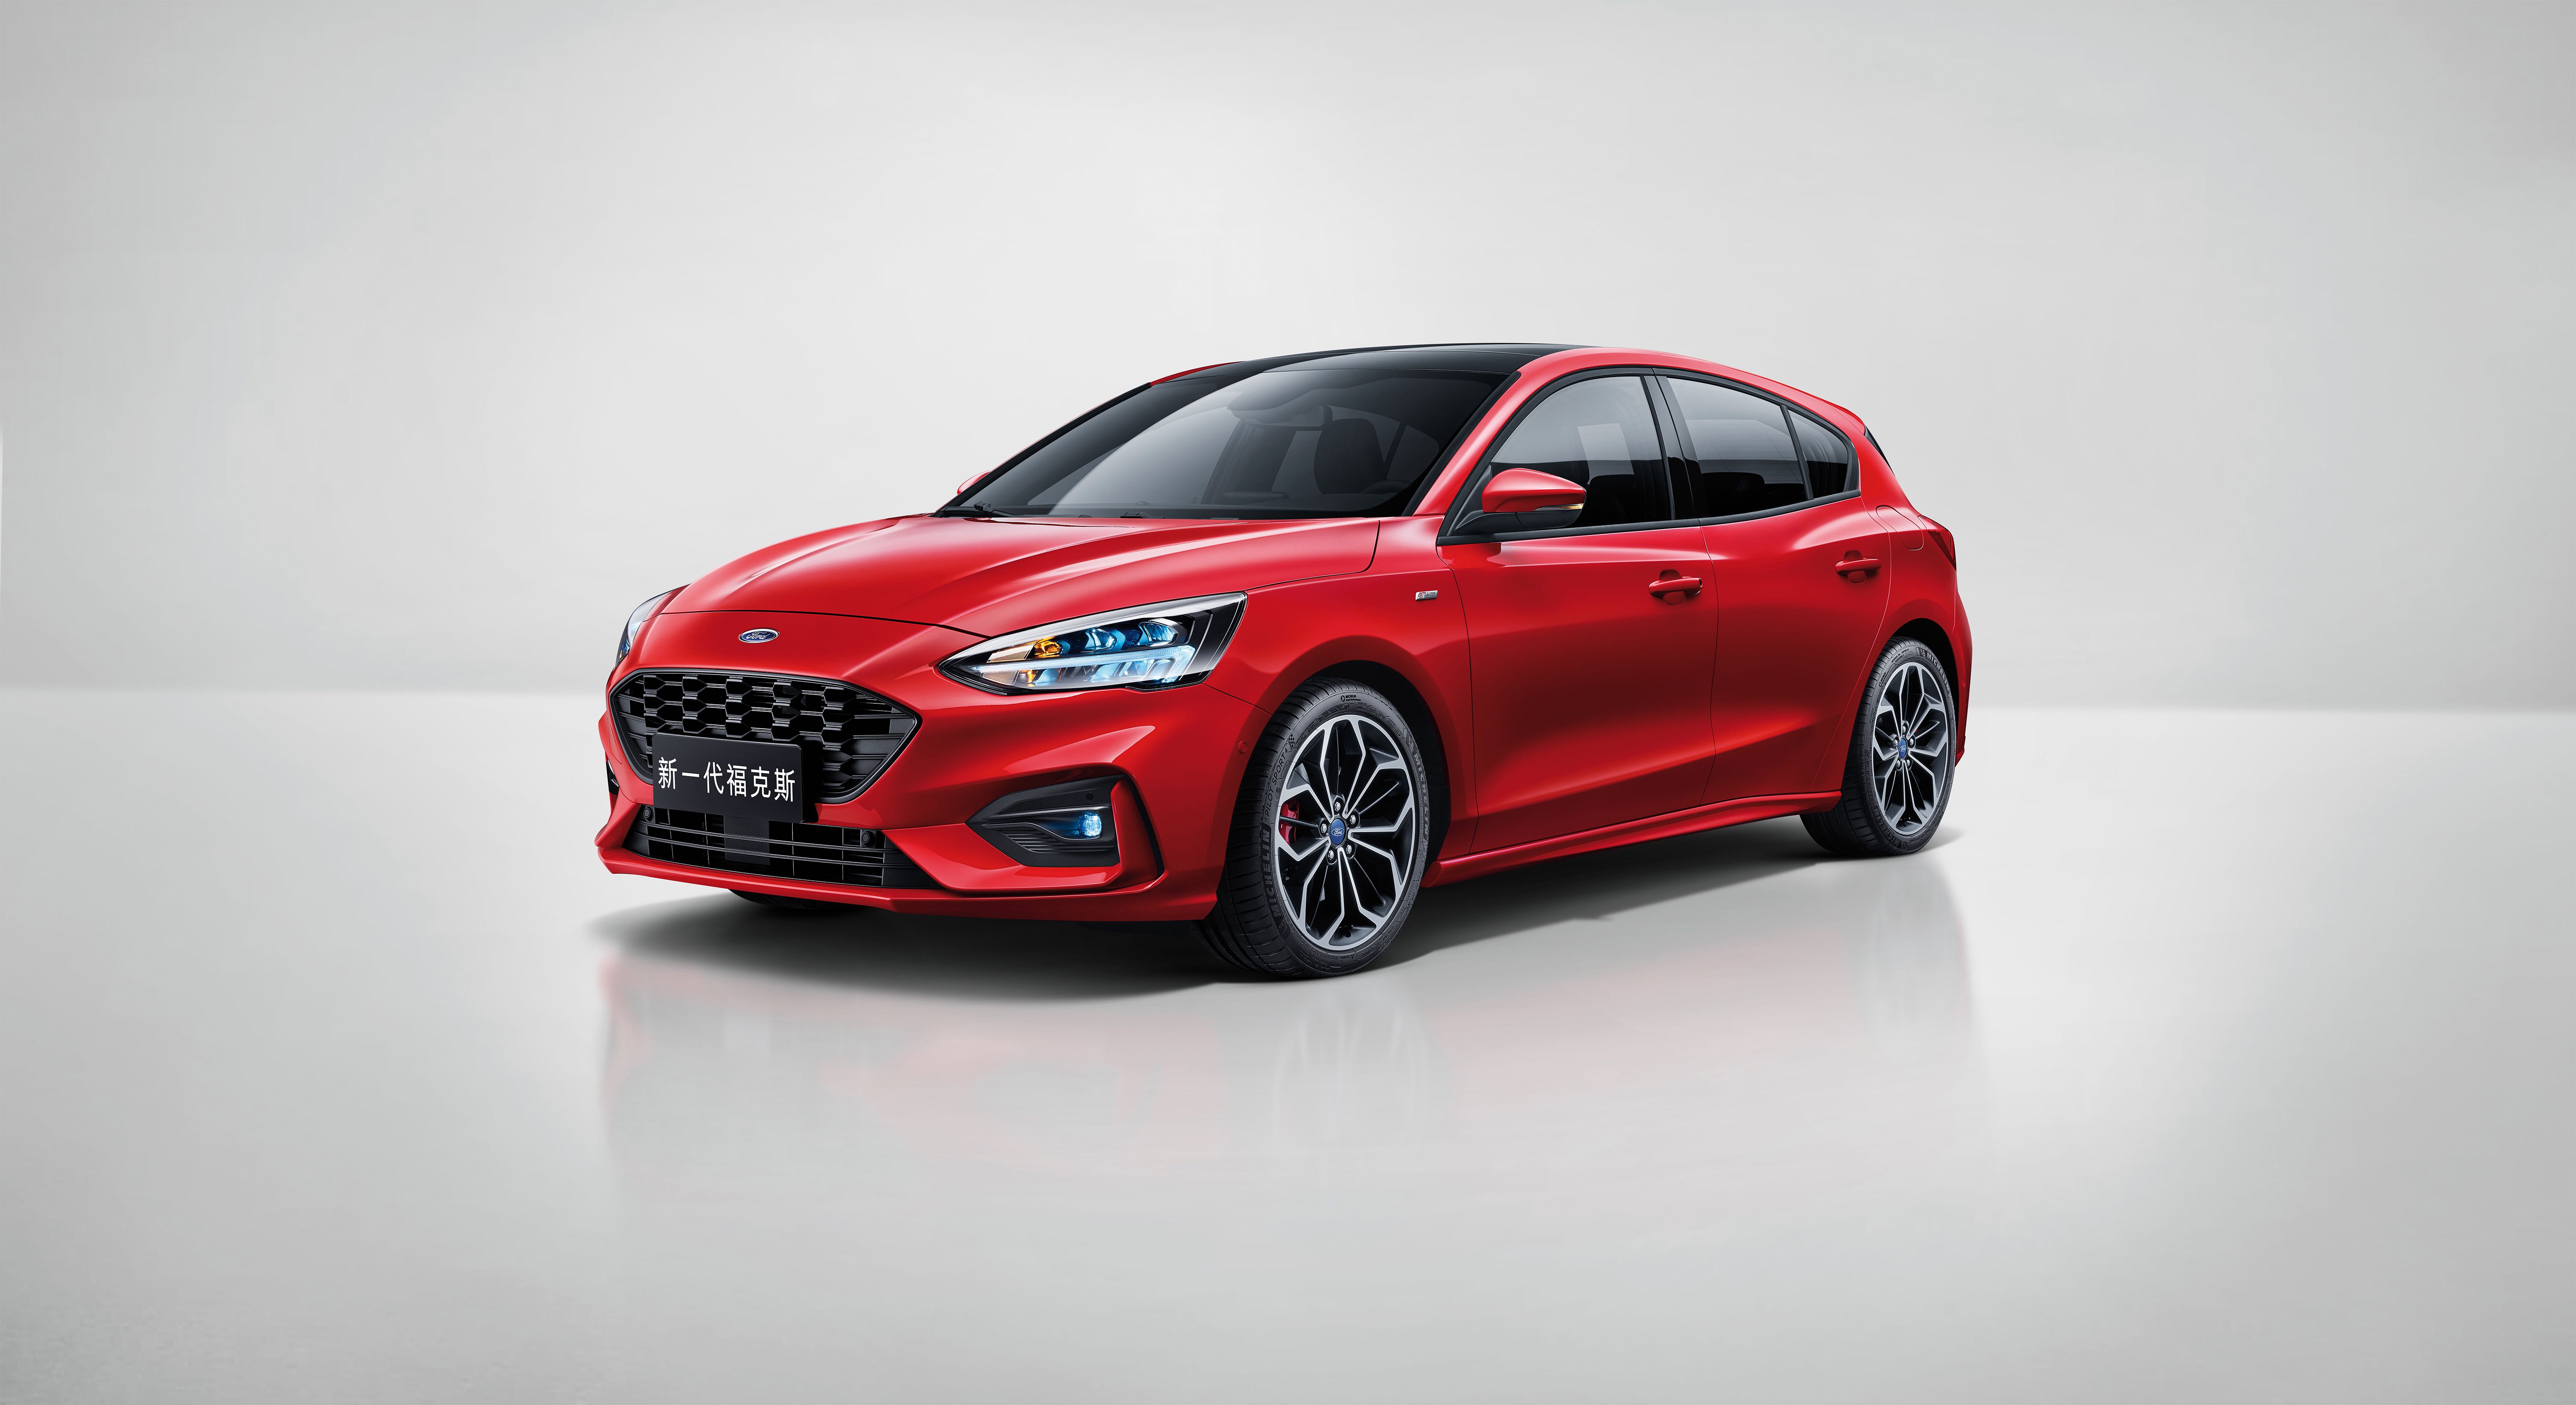 New Ford Focus Stars at Auto China